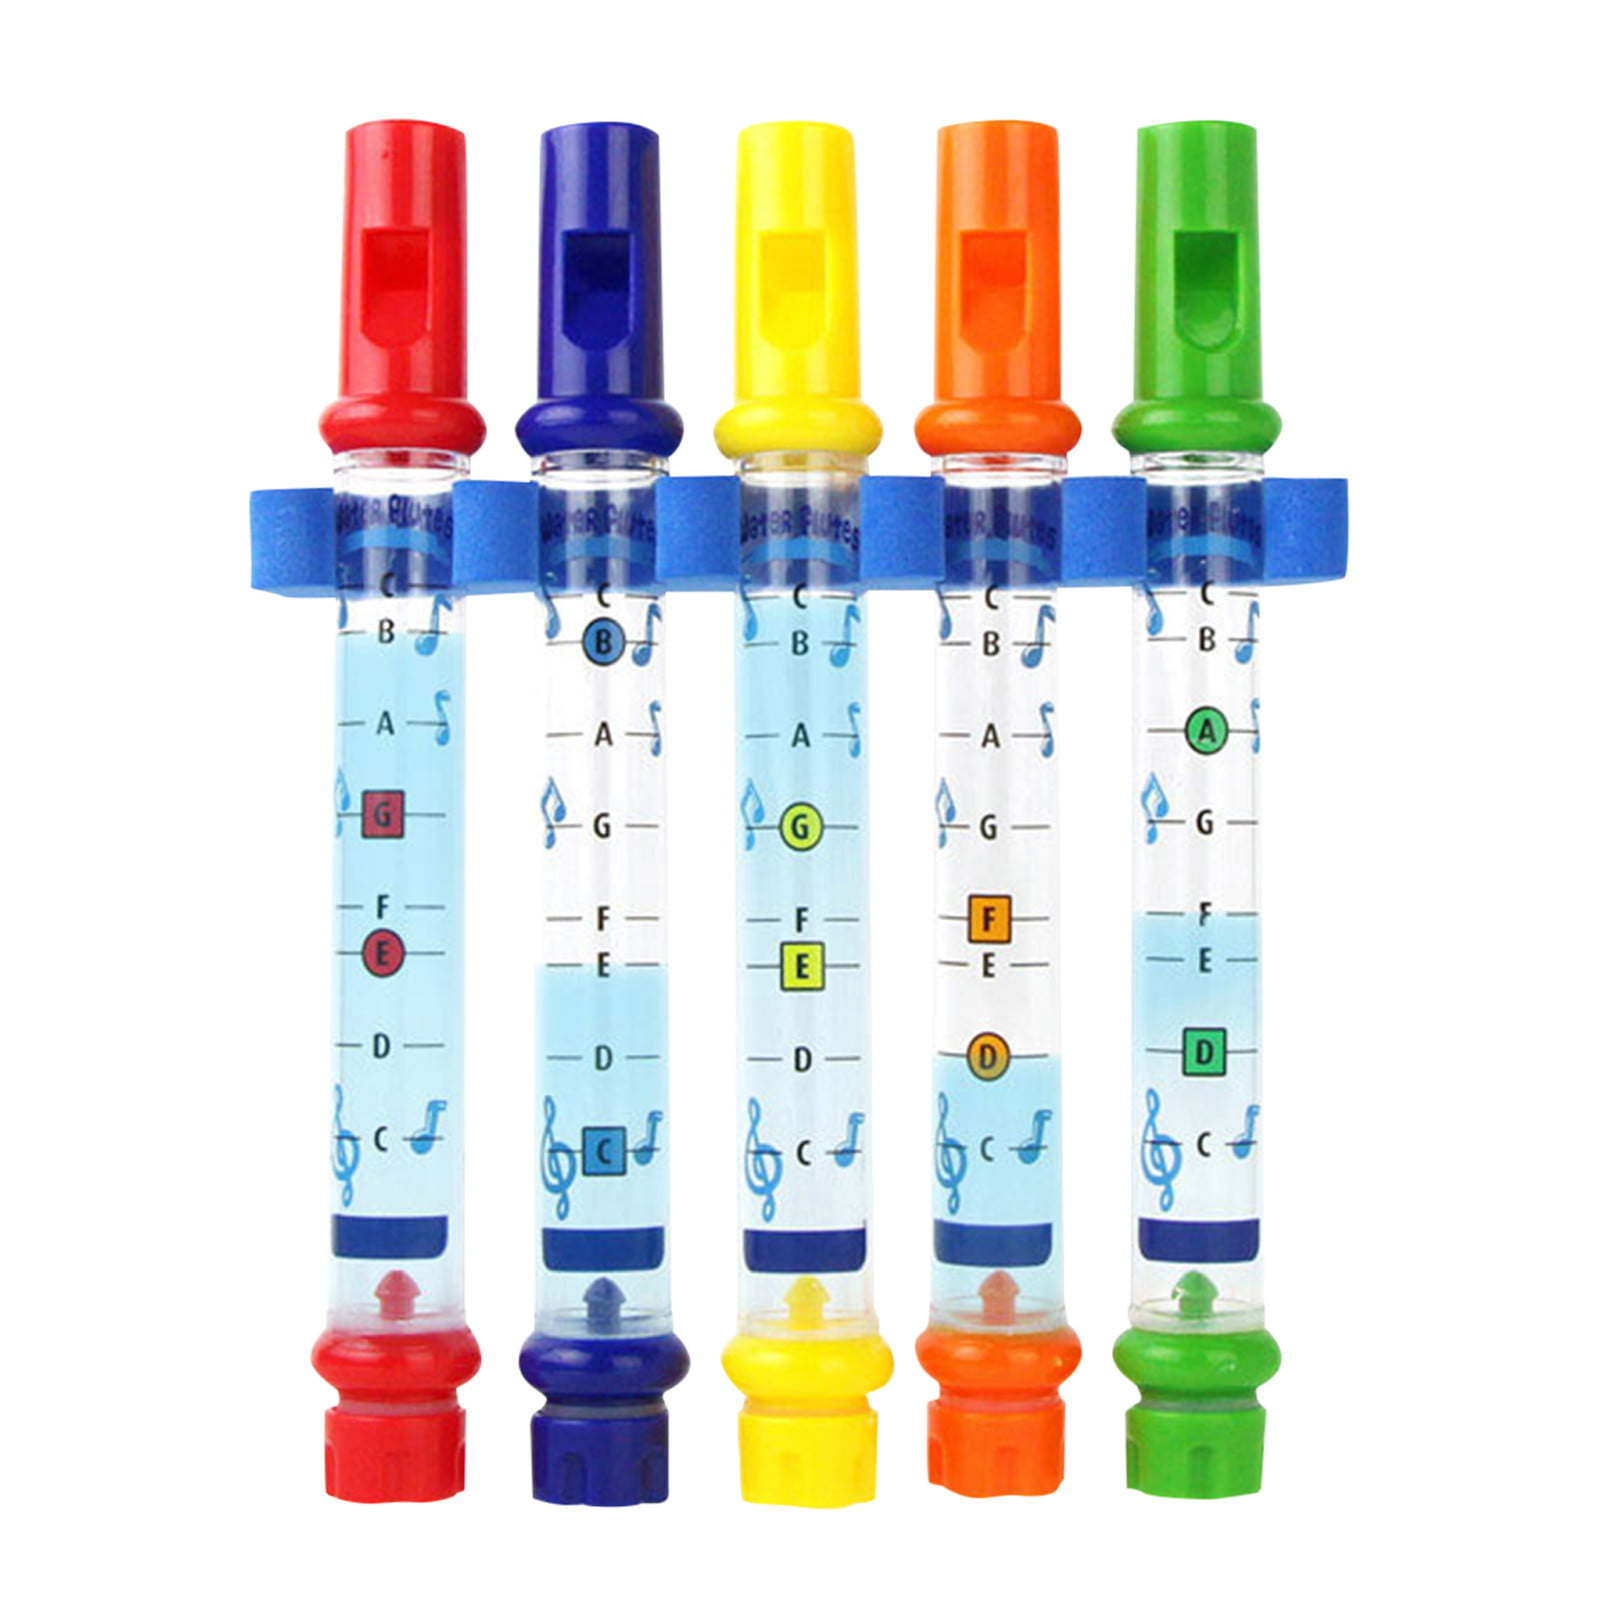 BATH FLUTES FUN WATERPROOF MUSICAL INSTRUMENT COLOURFUL PACK OF 5 FOR KIDS 